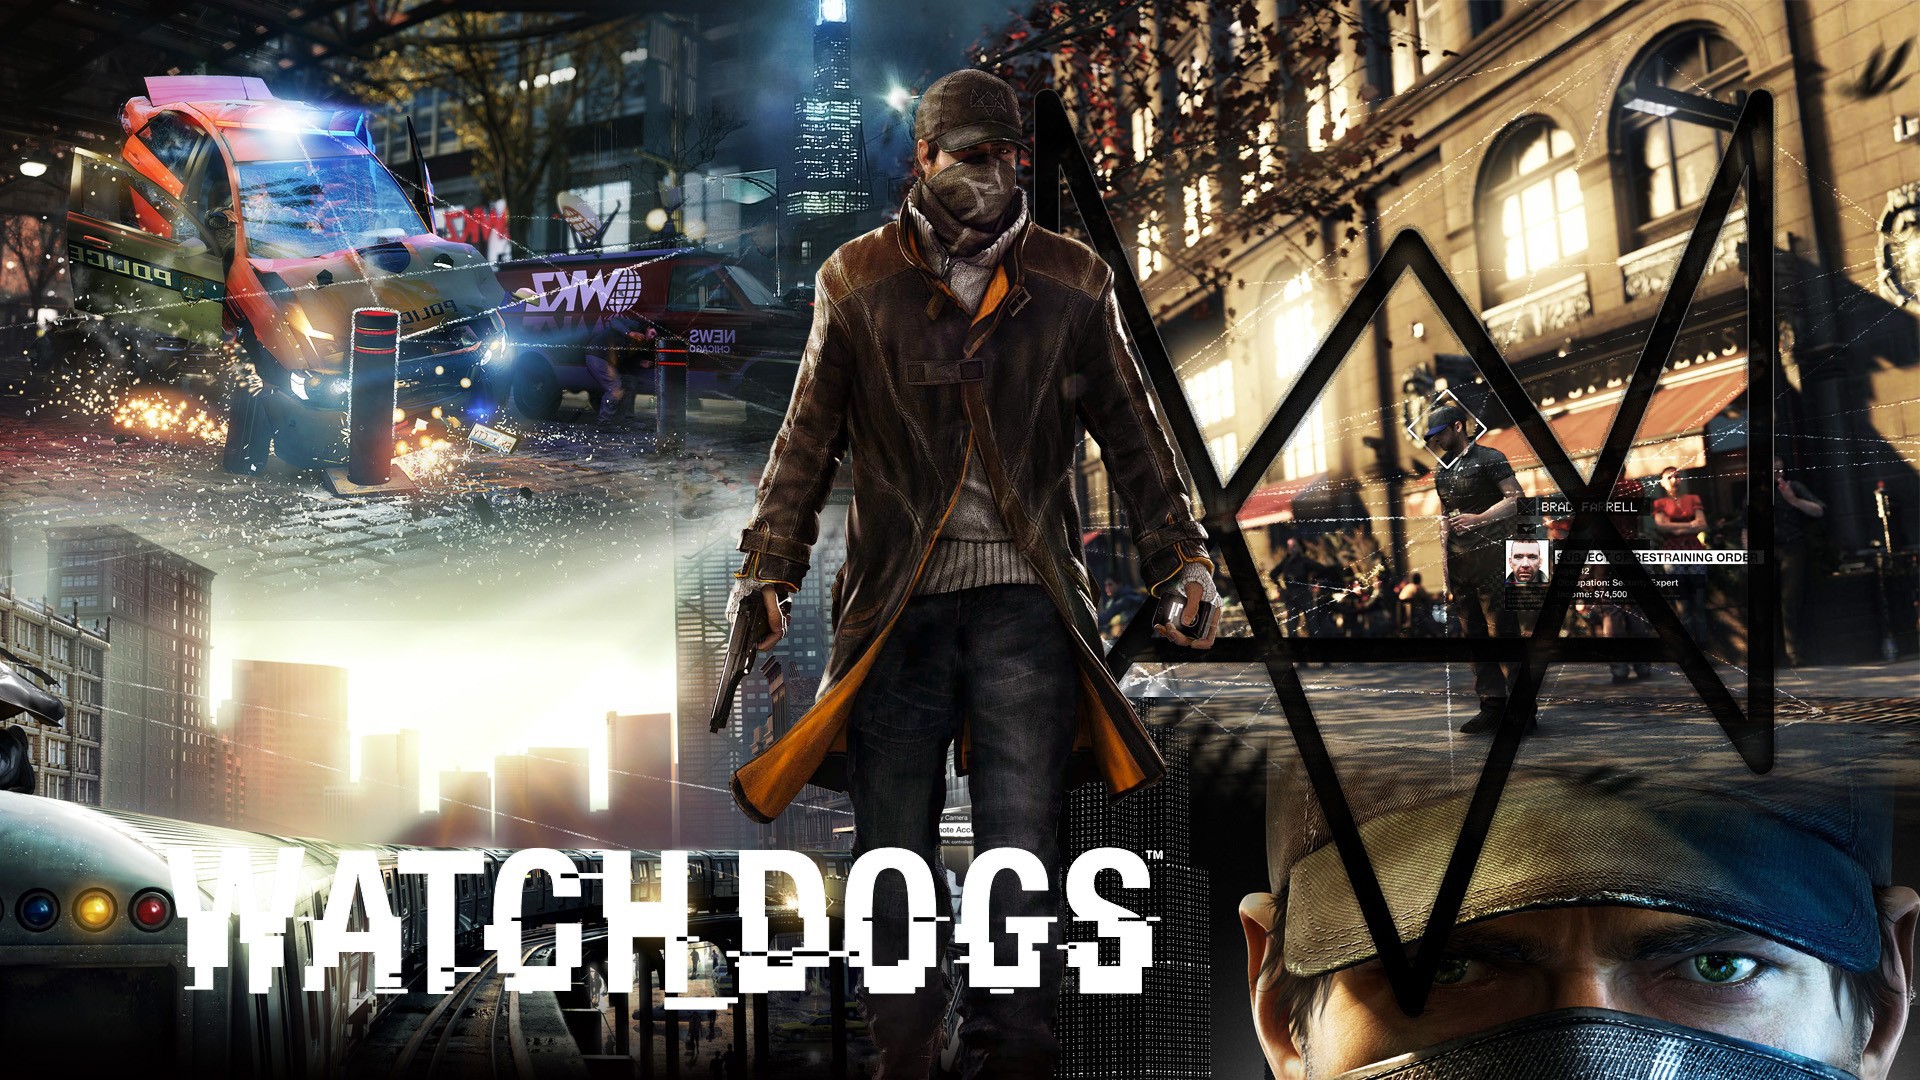 Watch dogs on steam фото 23